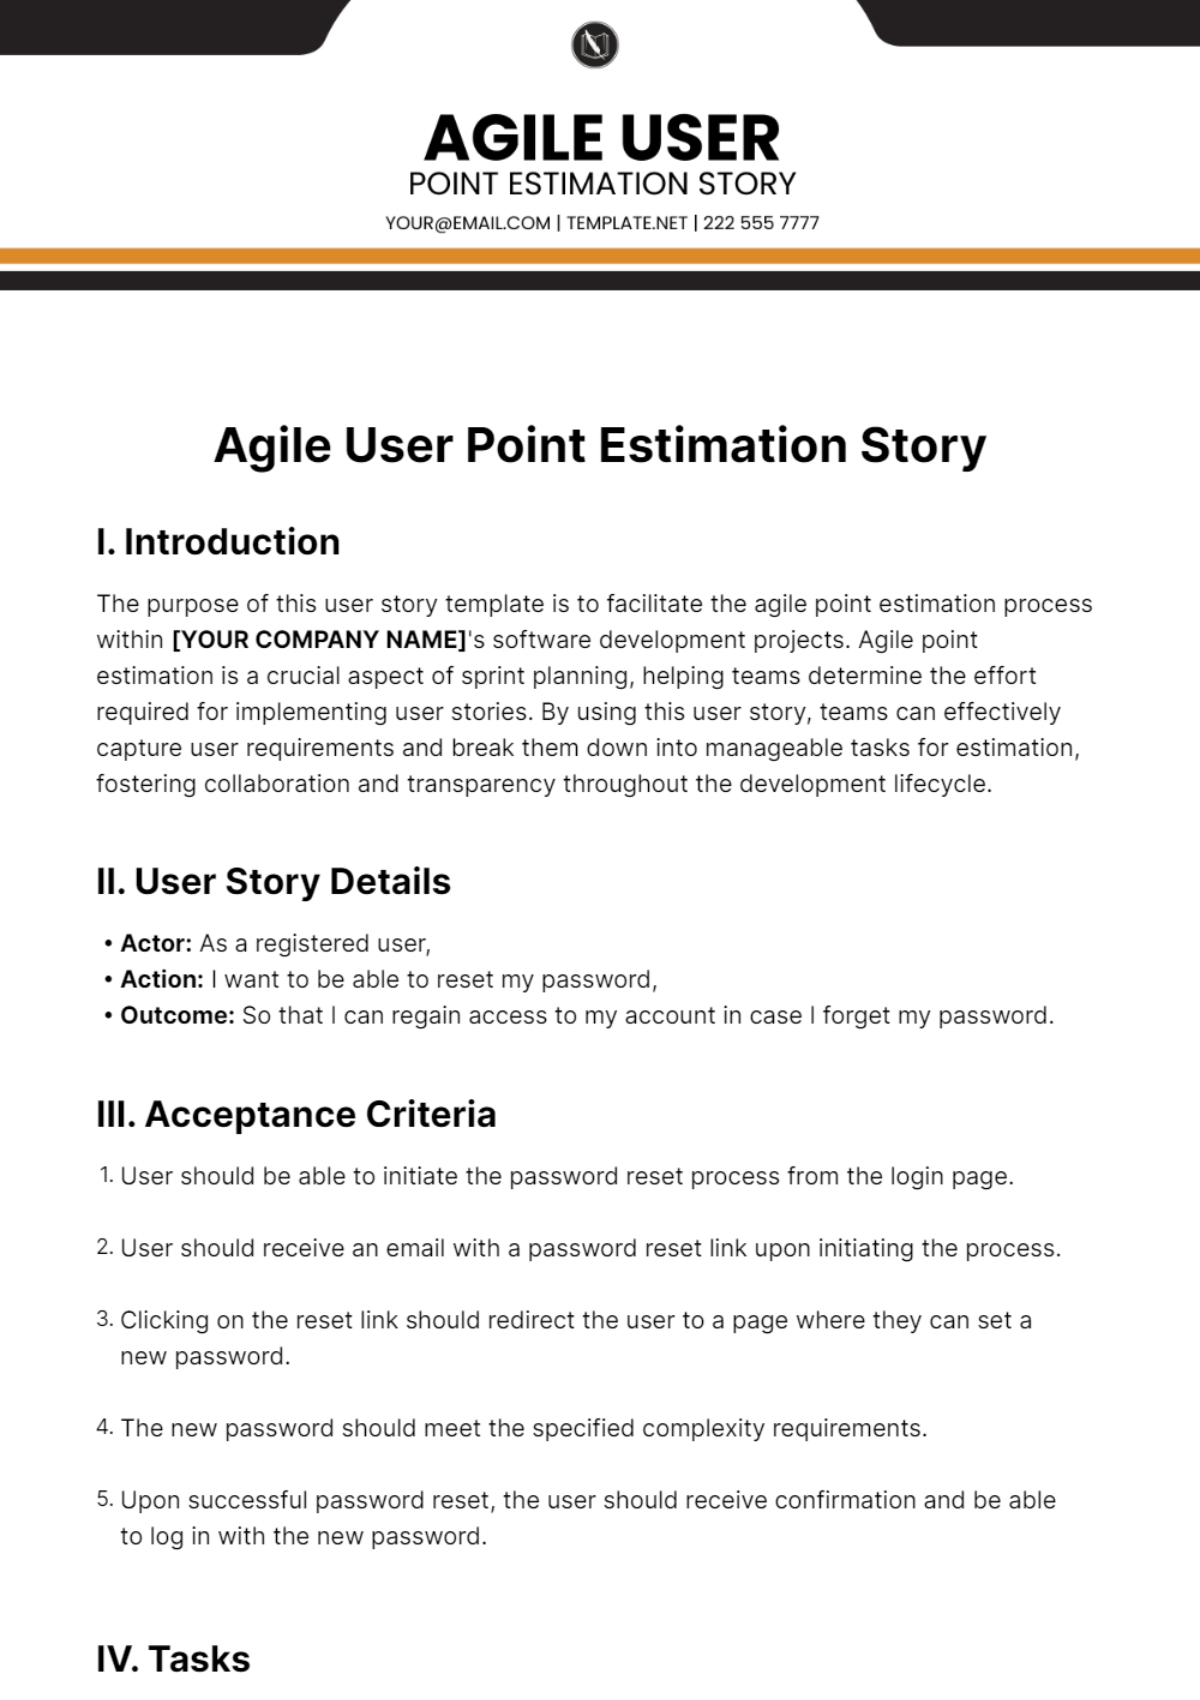 Agile User Point Estimation Story Template